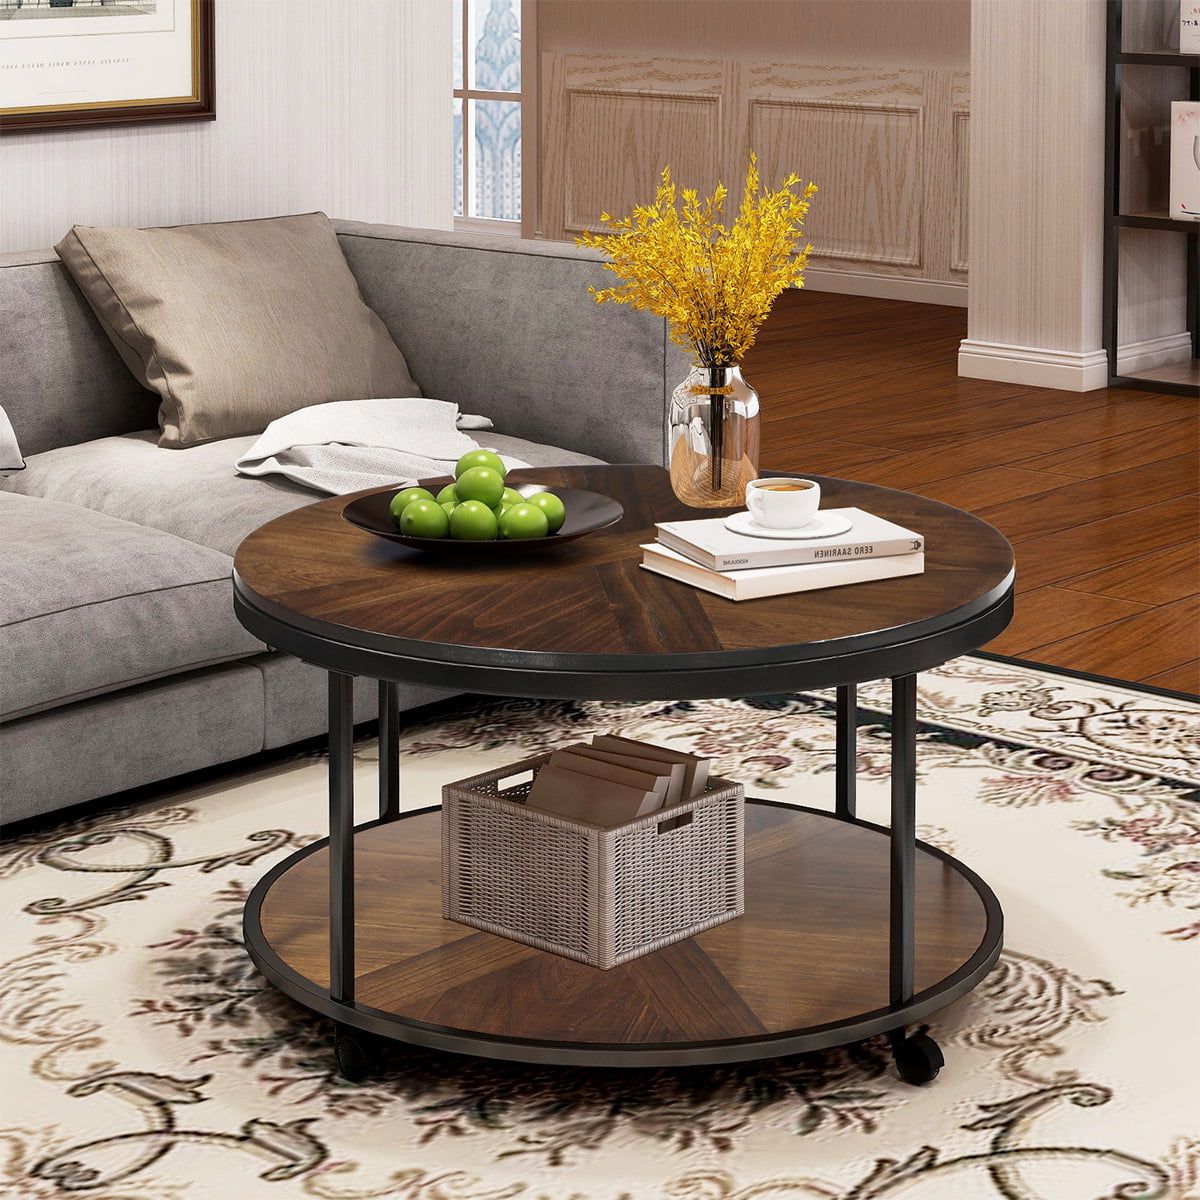 Latest Sentern Round Coffee Table With Caster Wheels And Unique Textured Pertaining To Round Coffee Tables With Storage (View 8 of 15)